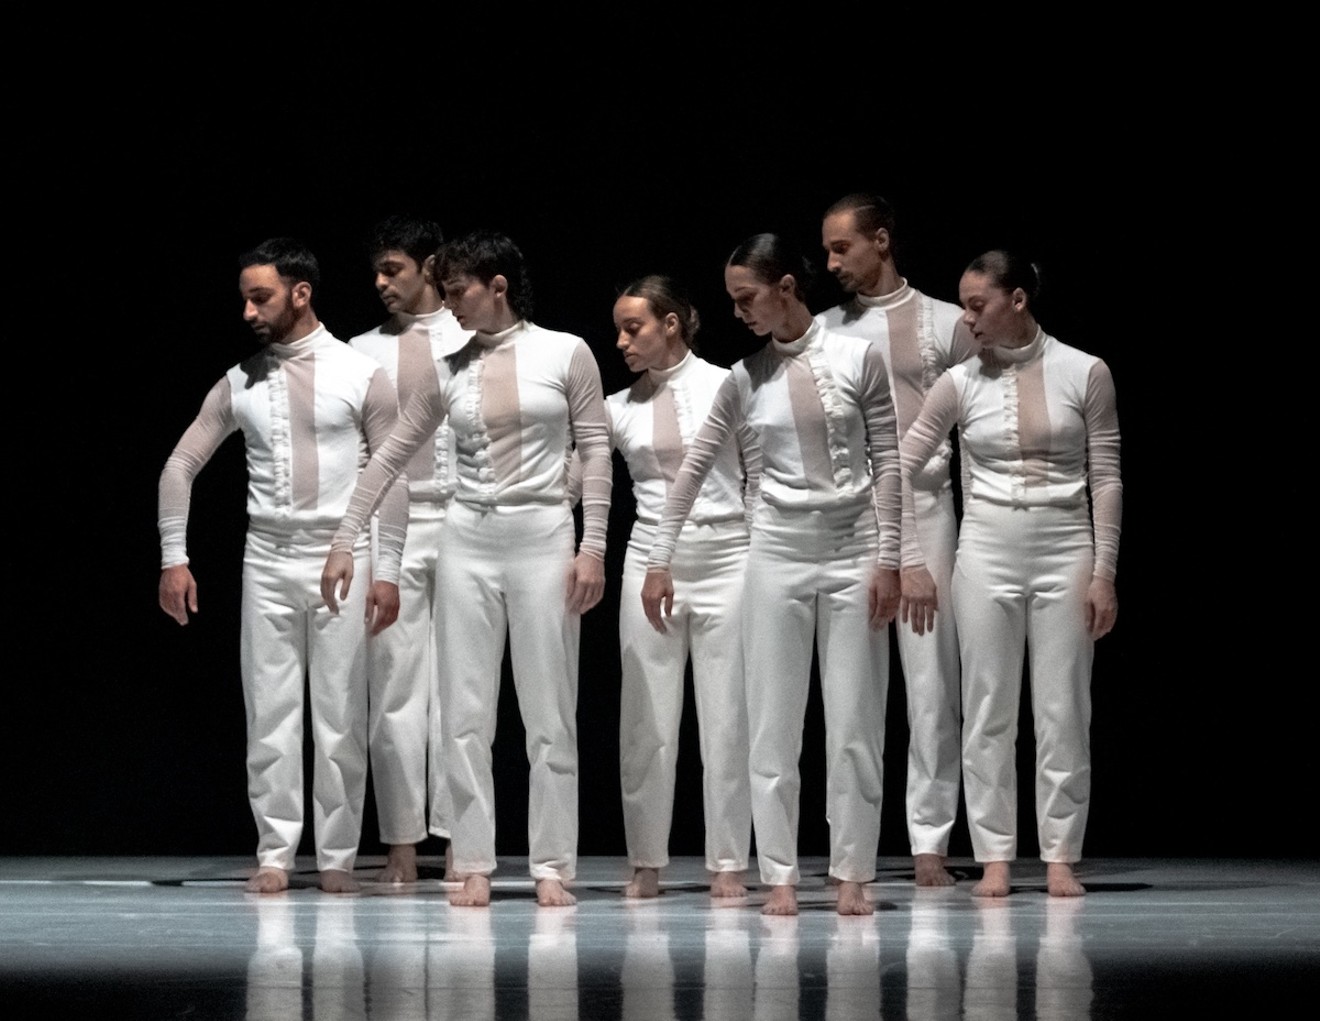 Compagnia Opus Ballet will perform The White Room during a program with Dance Now! Miami on Sunday, March 17, at the Miami Theater Center.